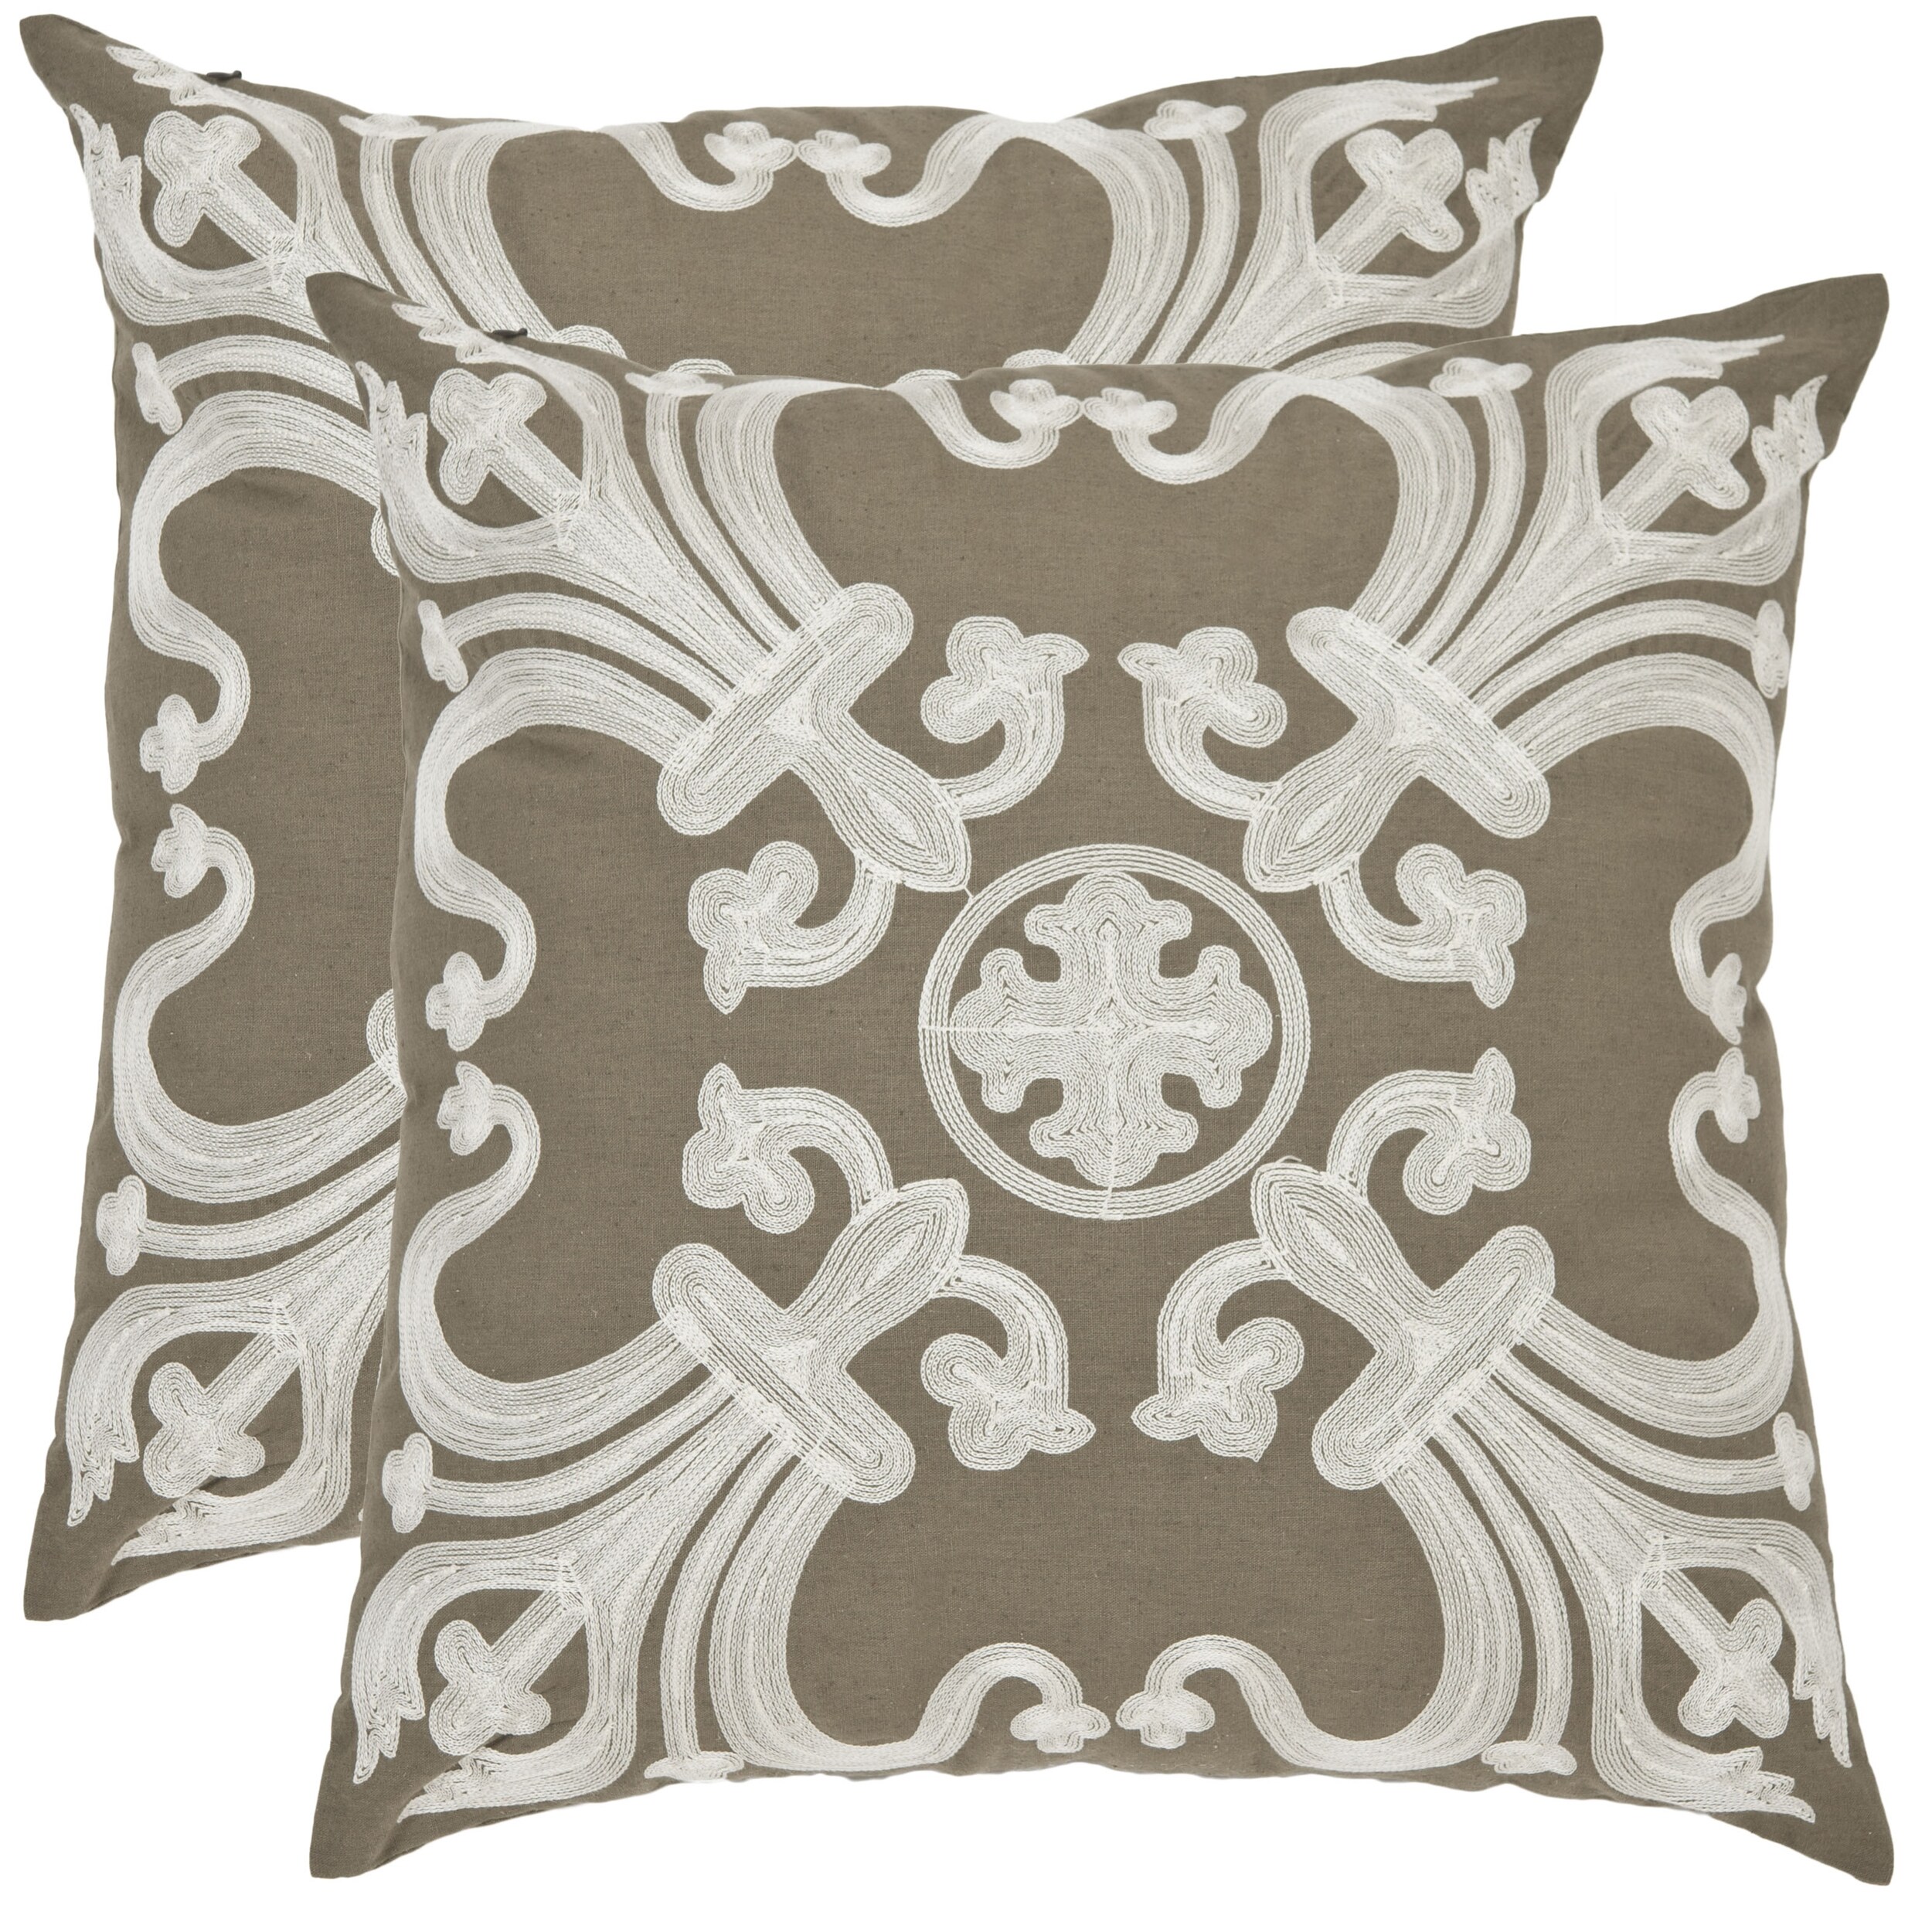 SAFAVIEH Colette 18-inch Olive Green Decorative Pillows (Set of 2)